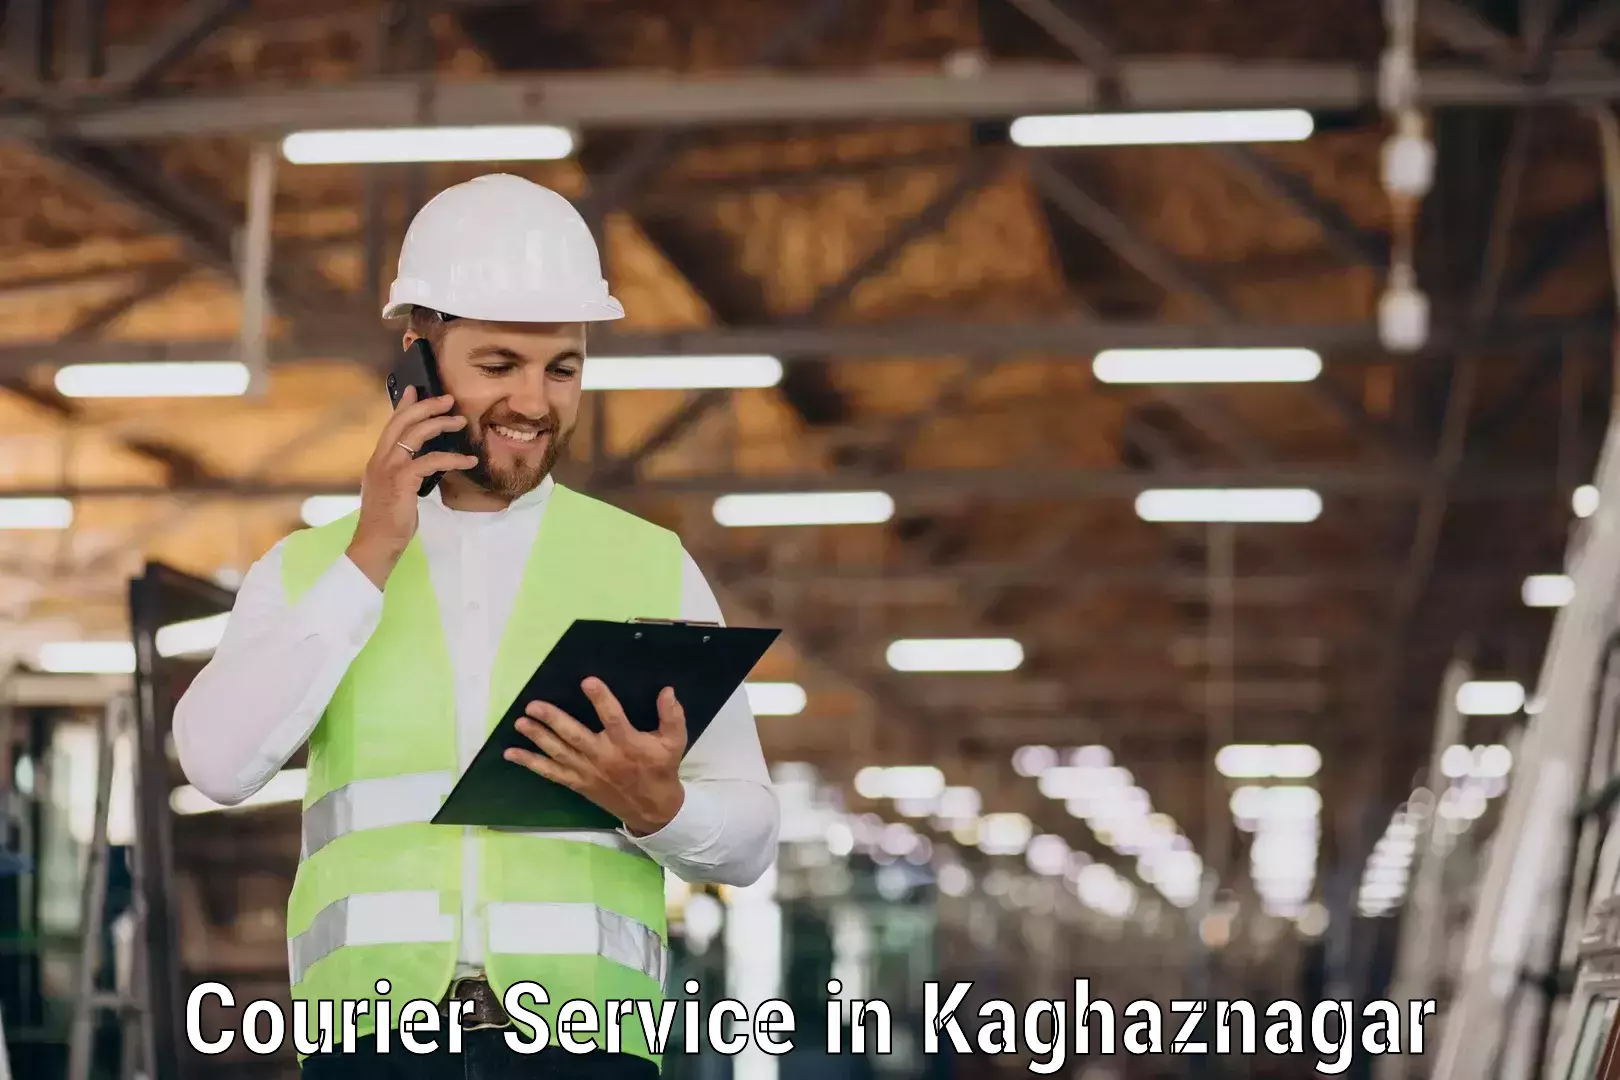 Reliable parcel services in Kaghaznagar